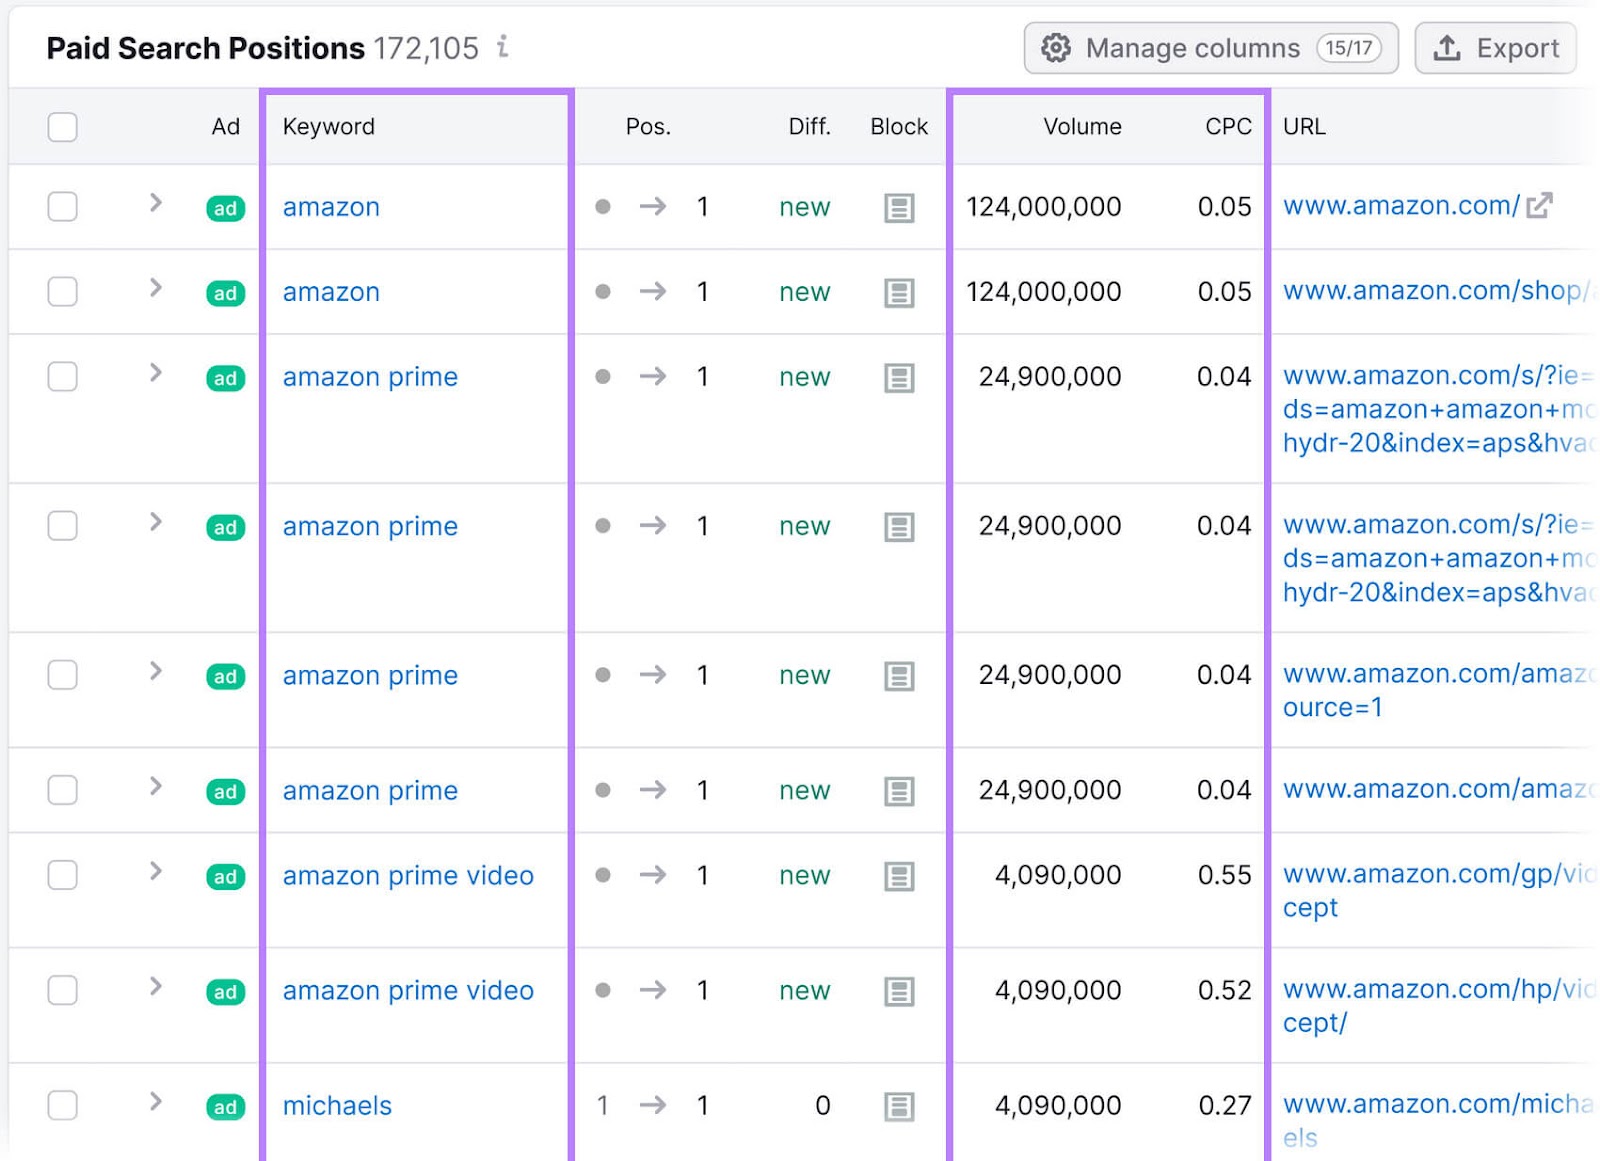 “Paid Search Positions” table with keywords, volume, and CPC columns highlighted